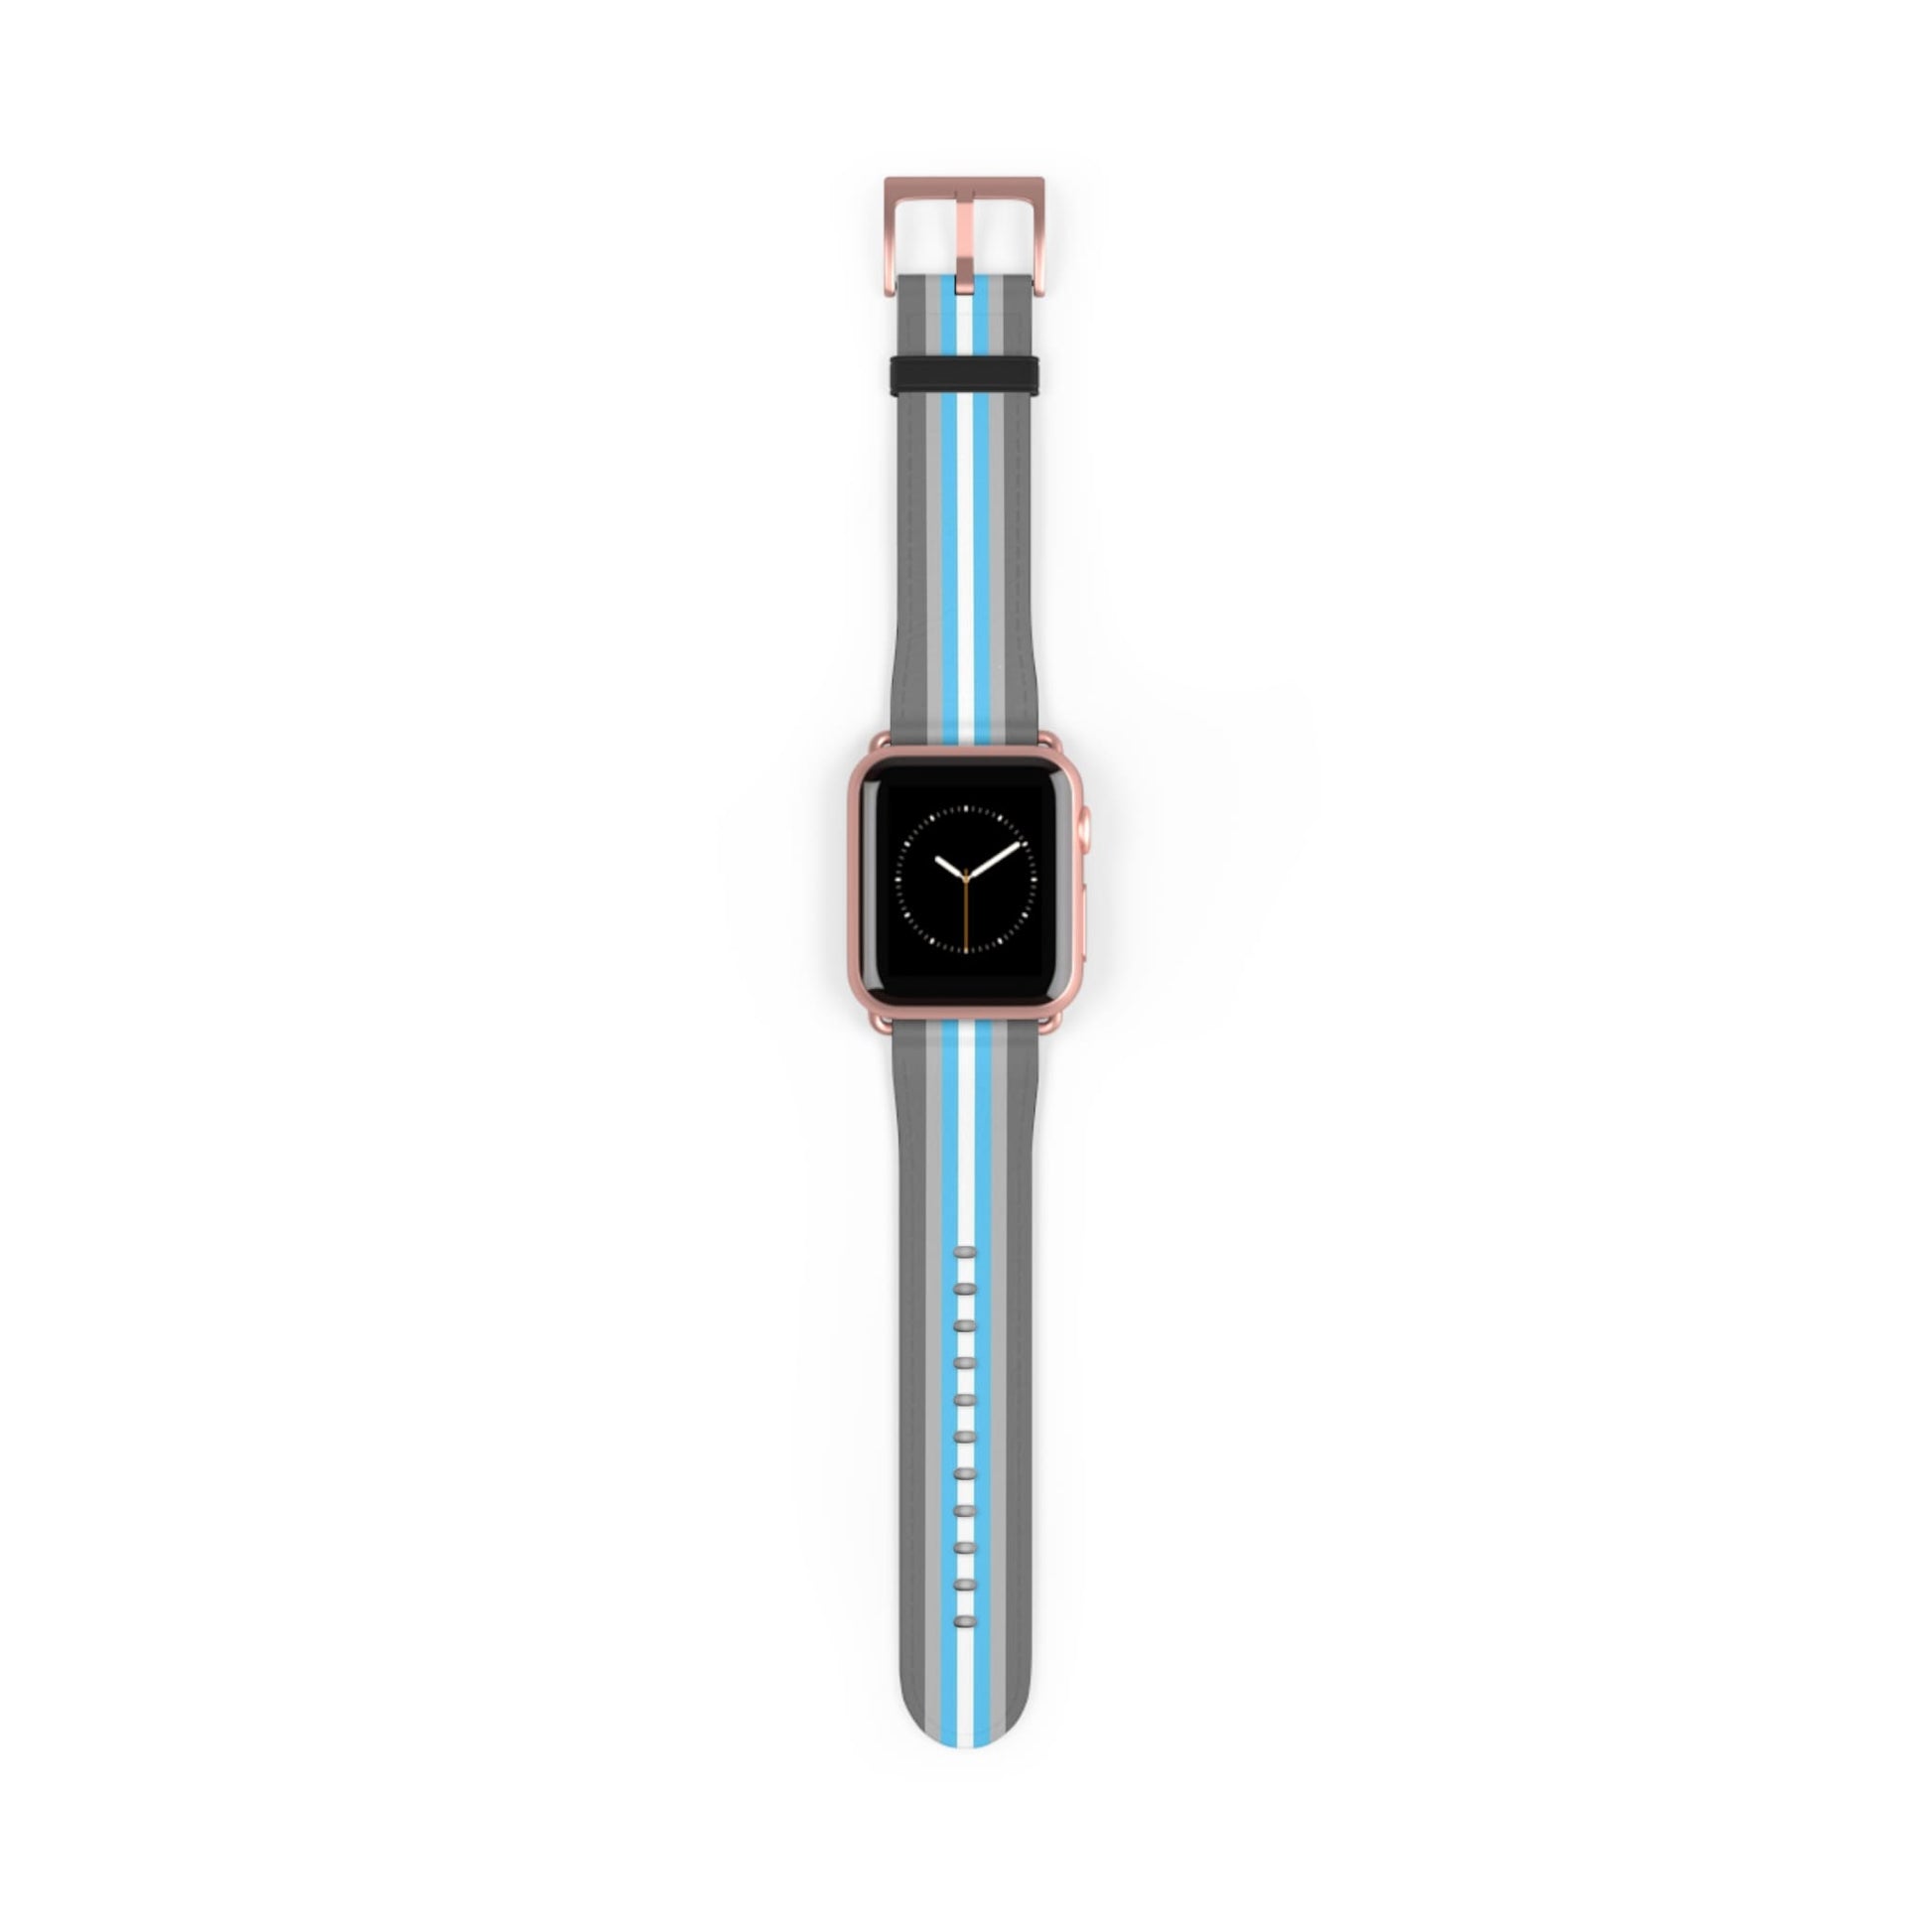 demiboy watch band for Apple iwatch, rose gold